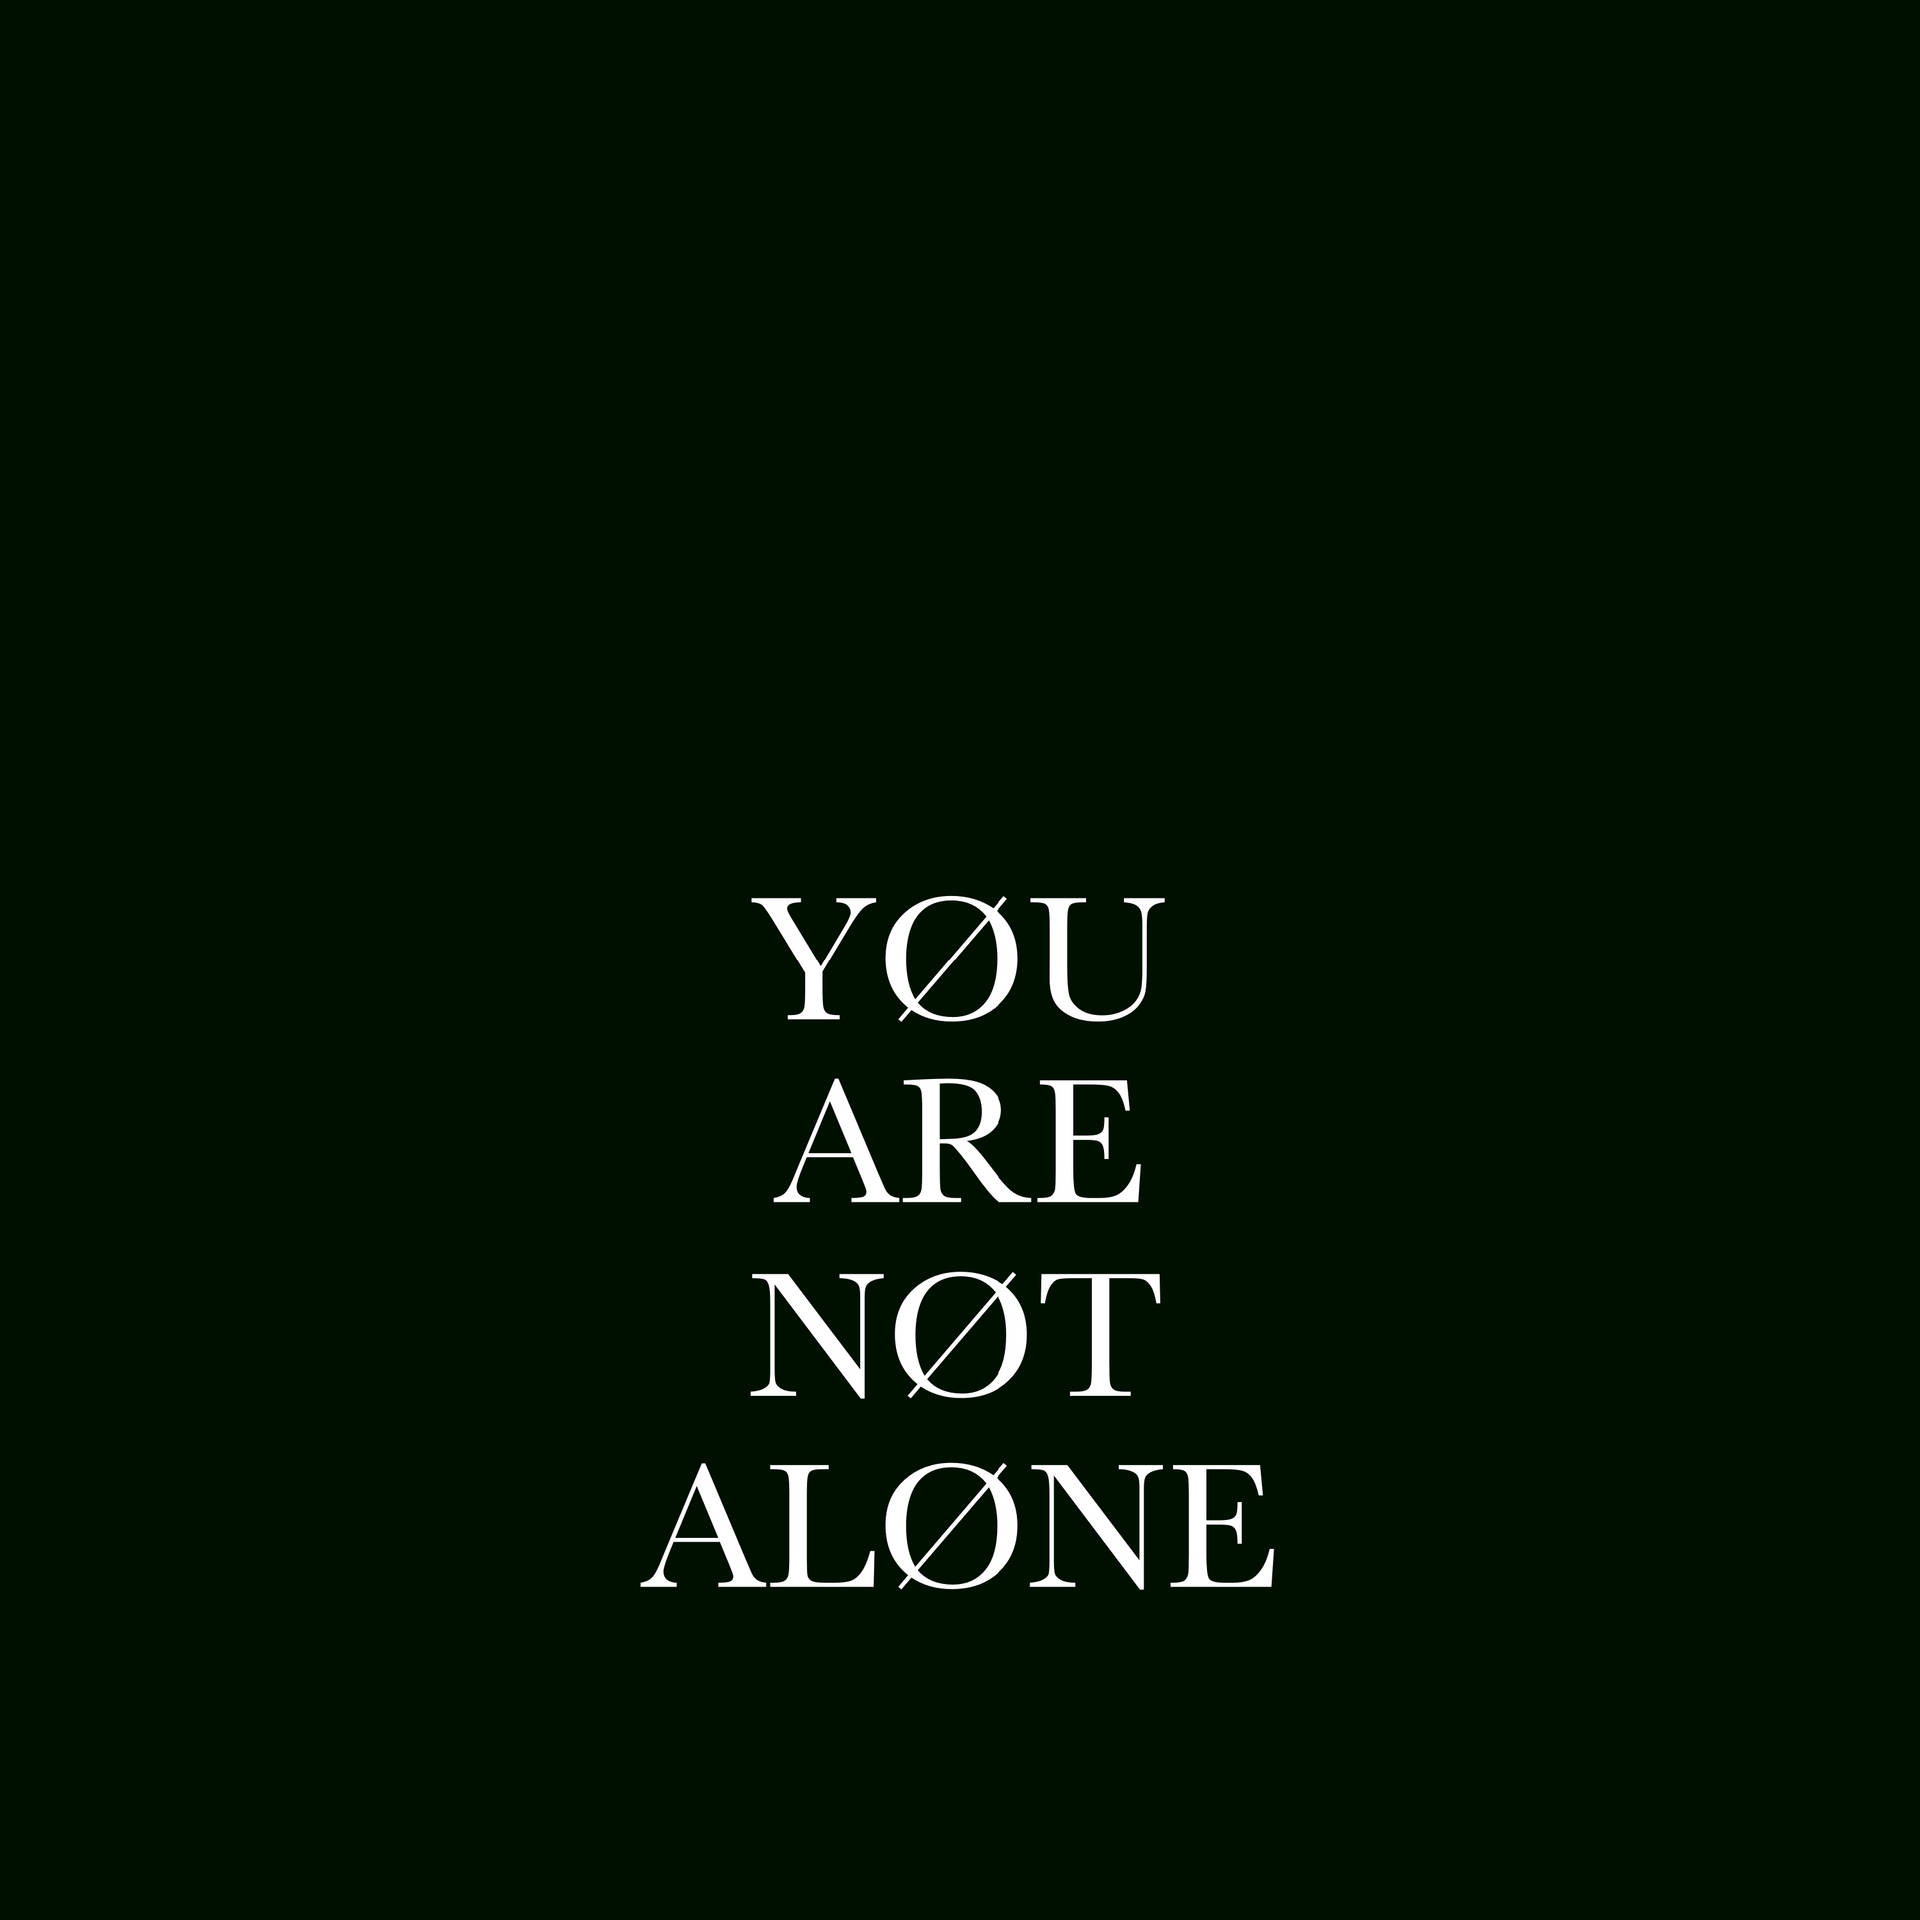 You are never alone. Wallpaper